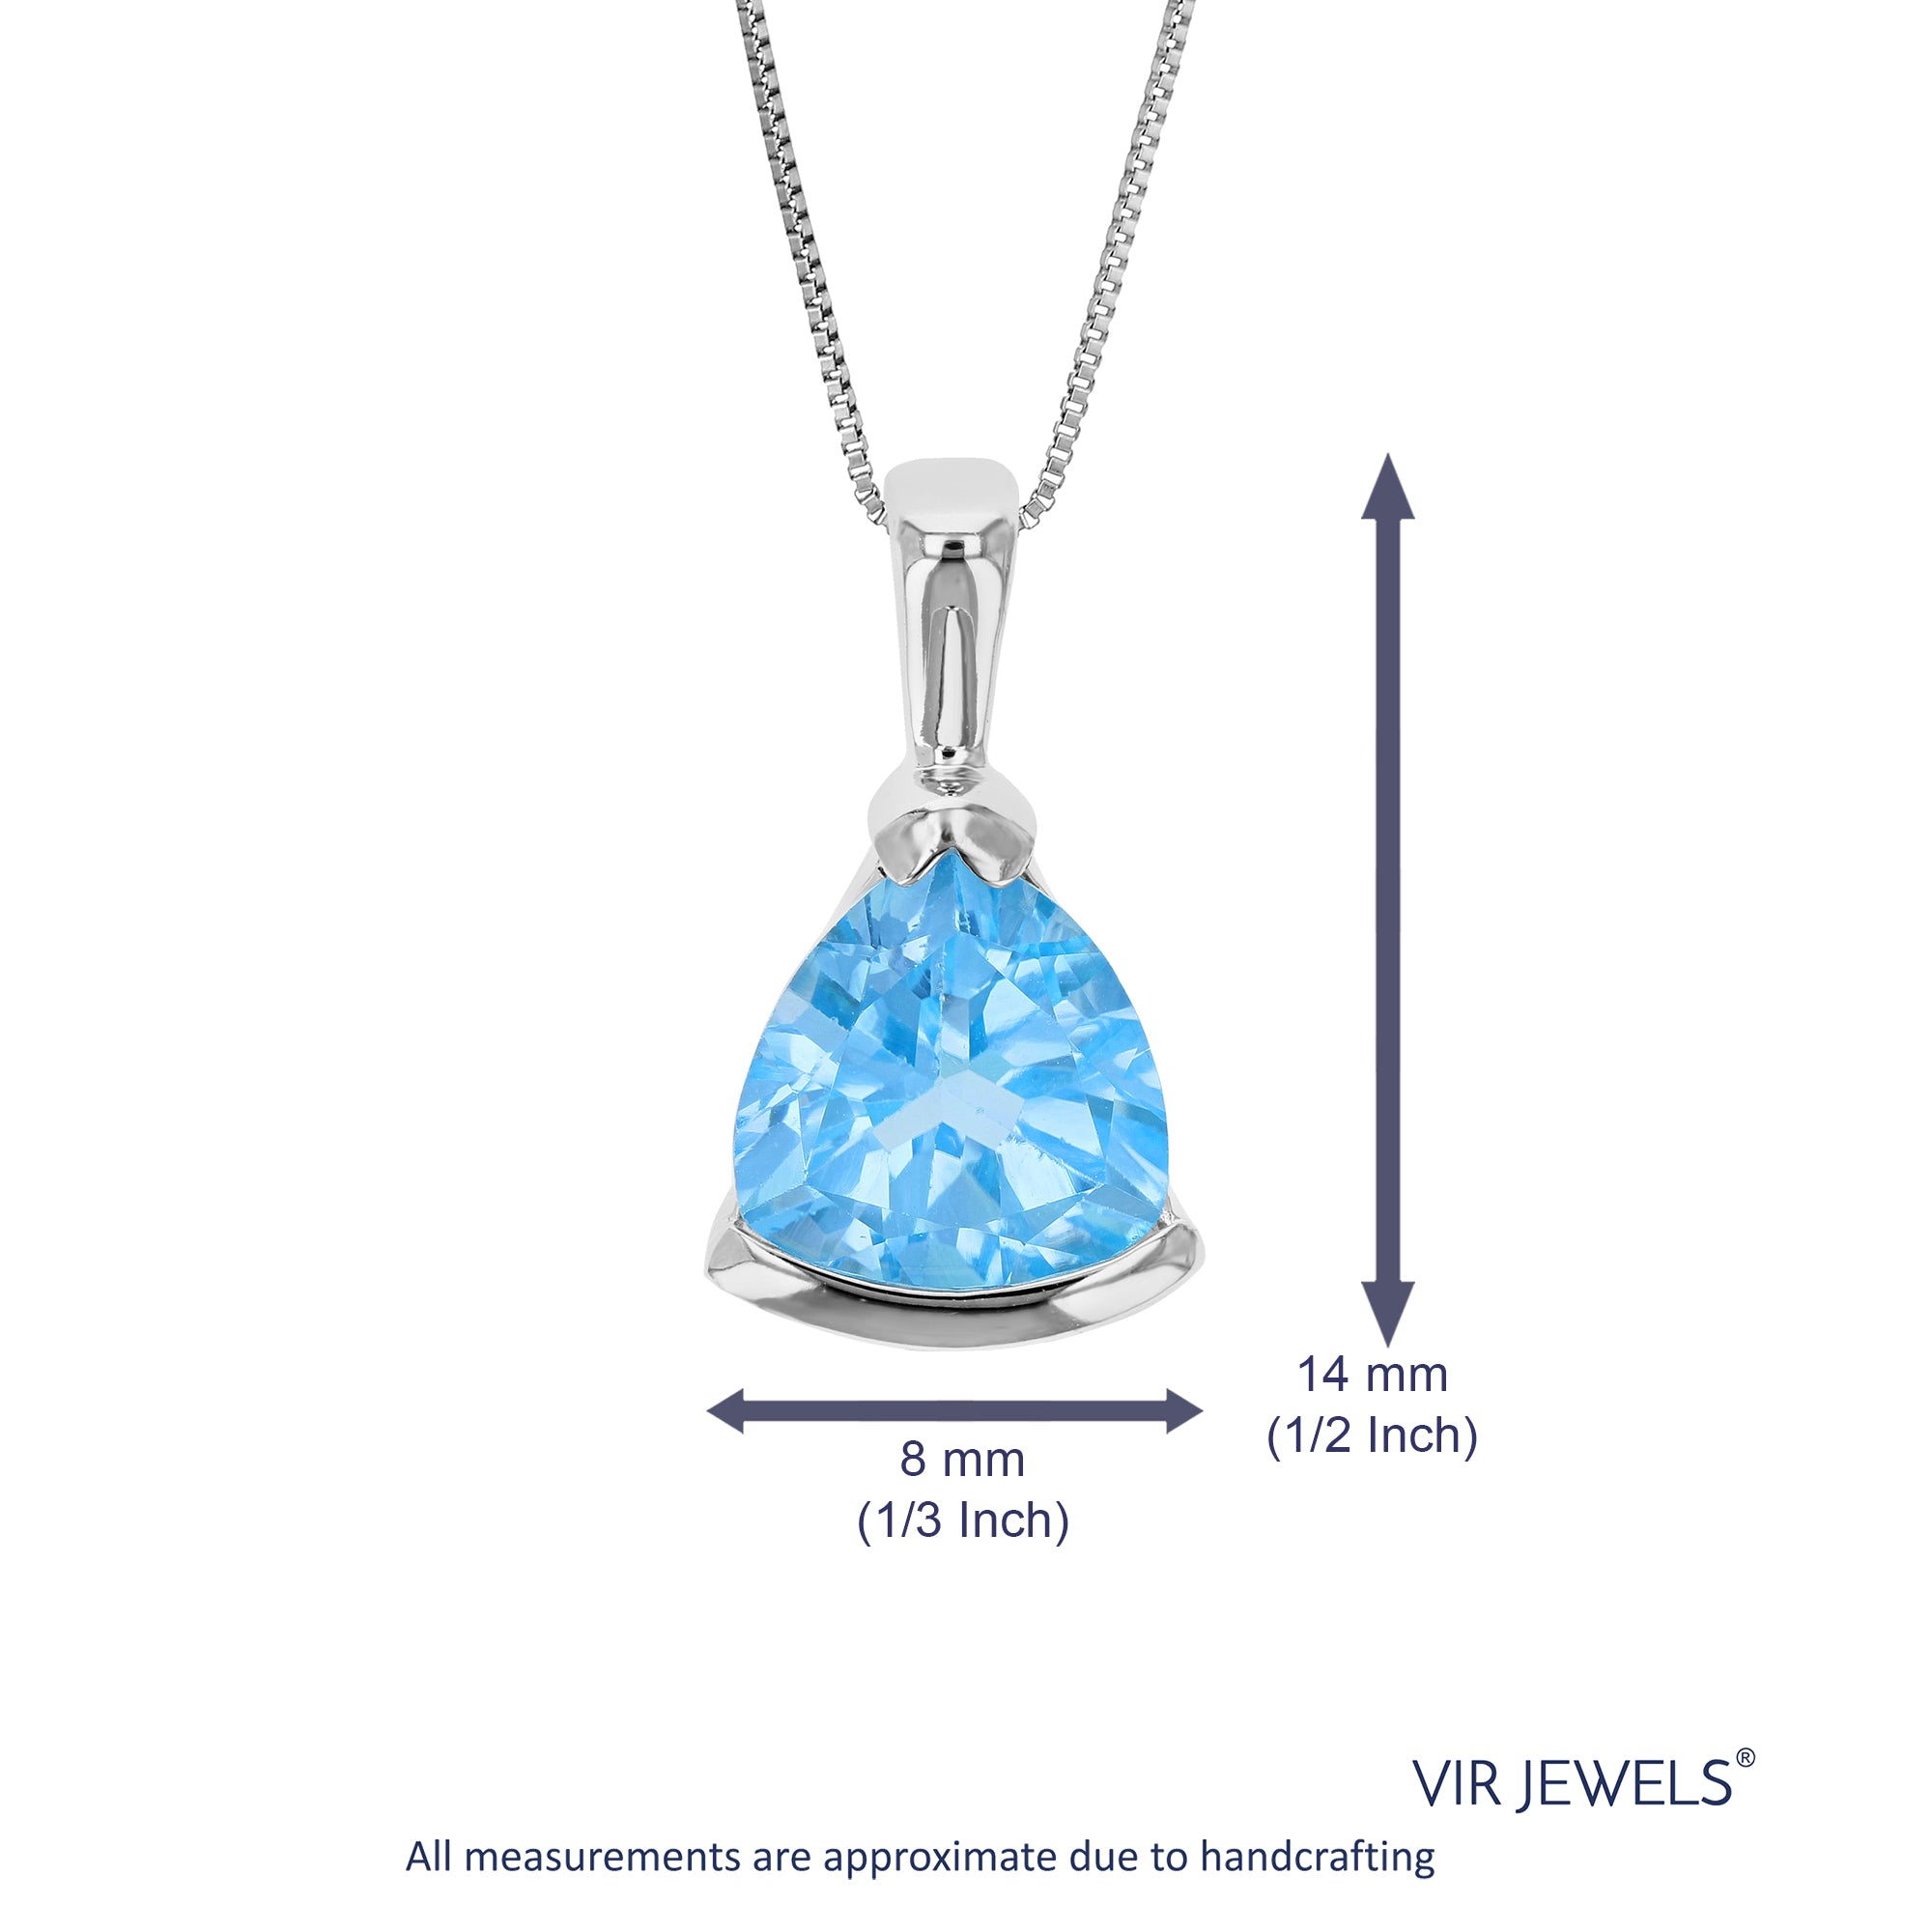 0.90 cttw Pendant Necklace, Swiss Blue Topaz Trillion Shape Pendant Necklace for Women in .925 Sterling Silver with Rhodium, 18 Inch Chain, Channel Setting